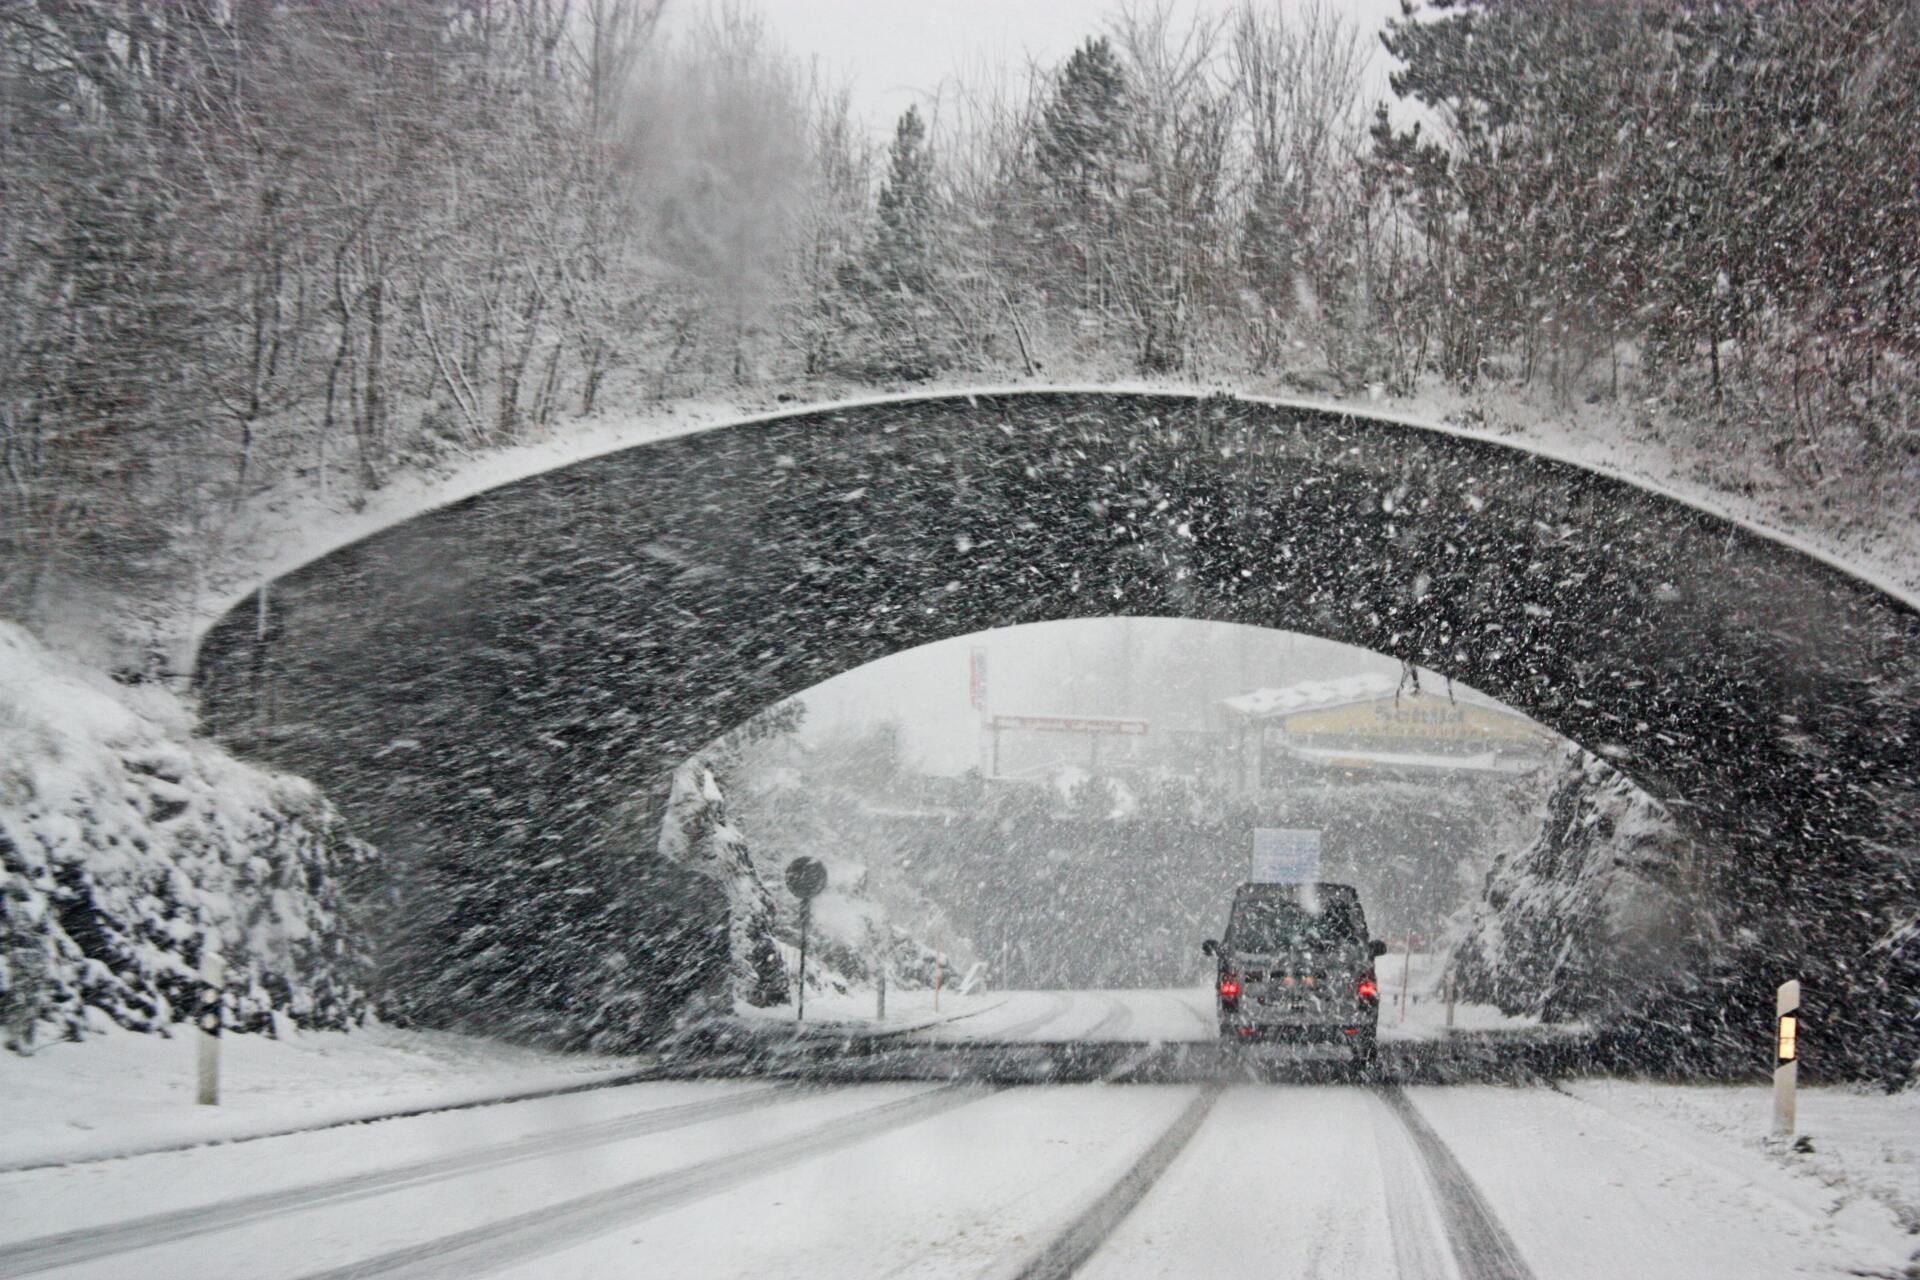 A truck driving on snow covered roads, while it is snowing, under a bridge